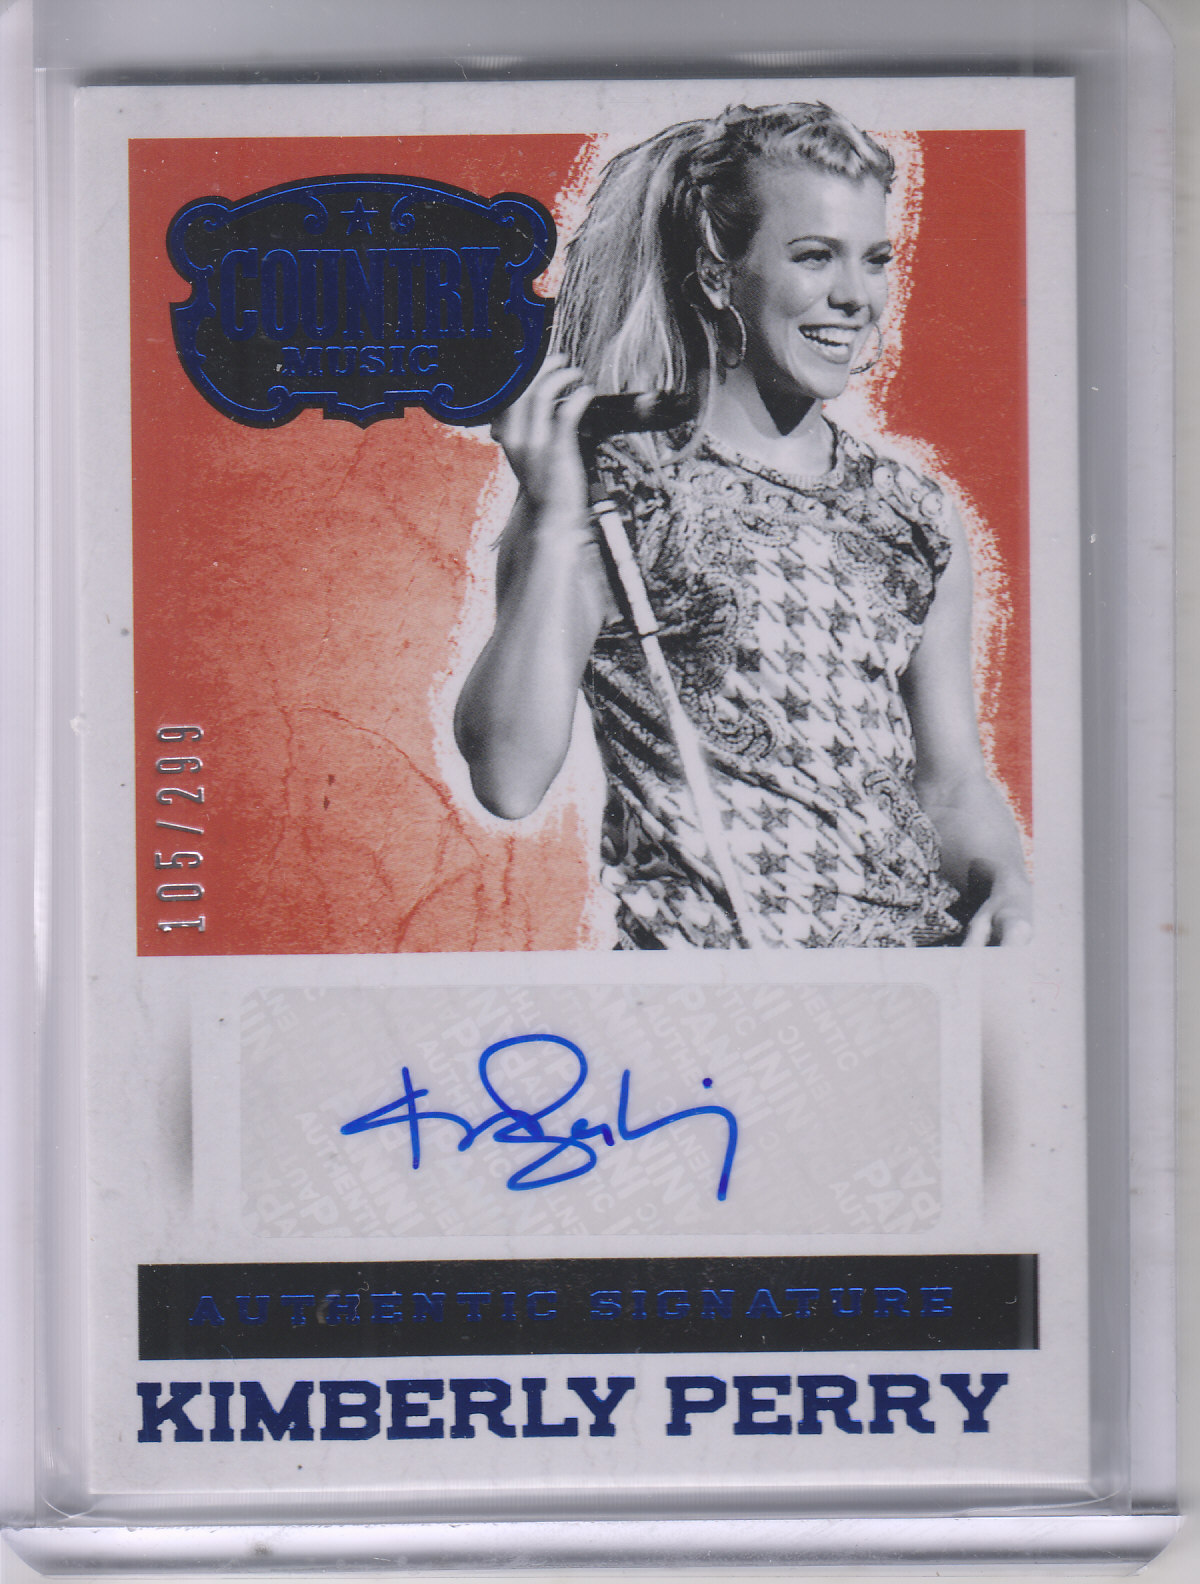  Kimberly Perry player image